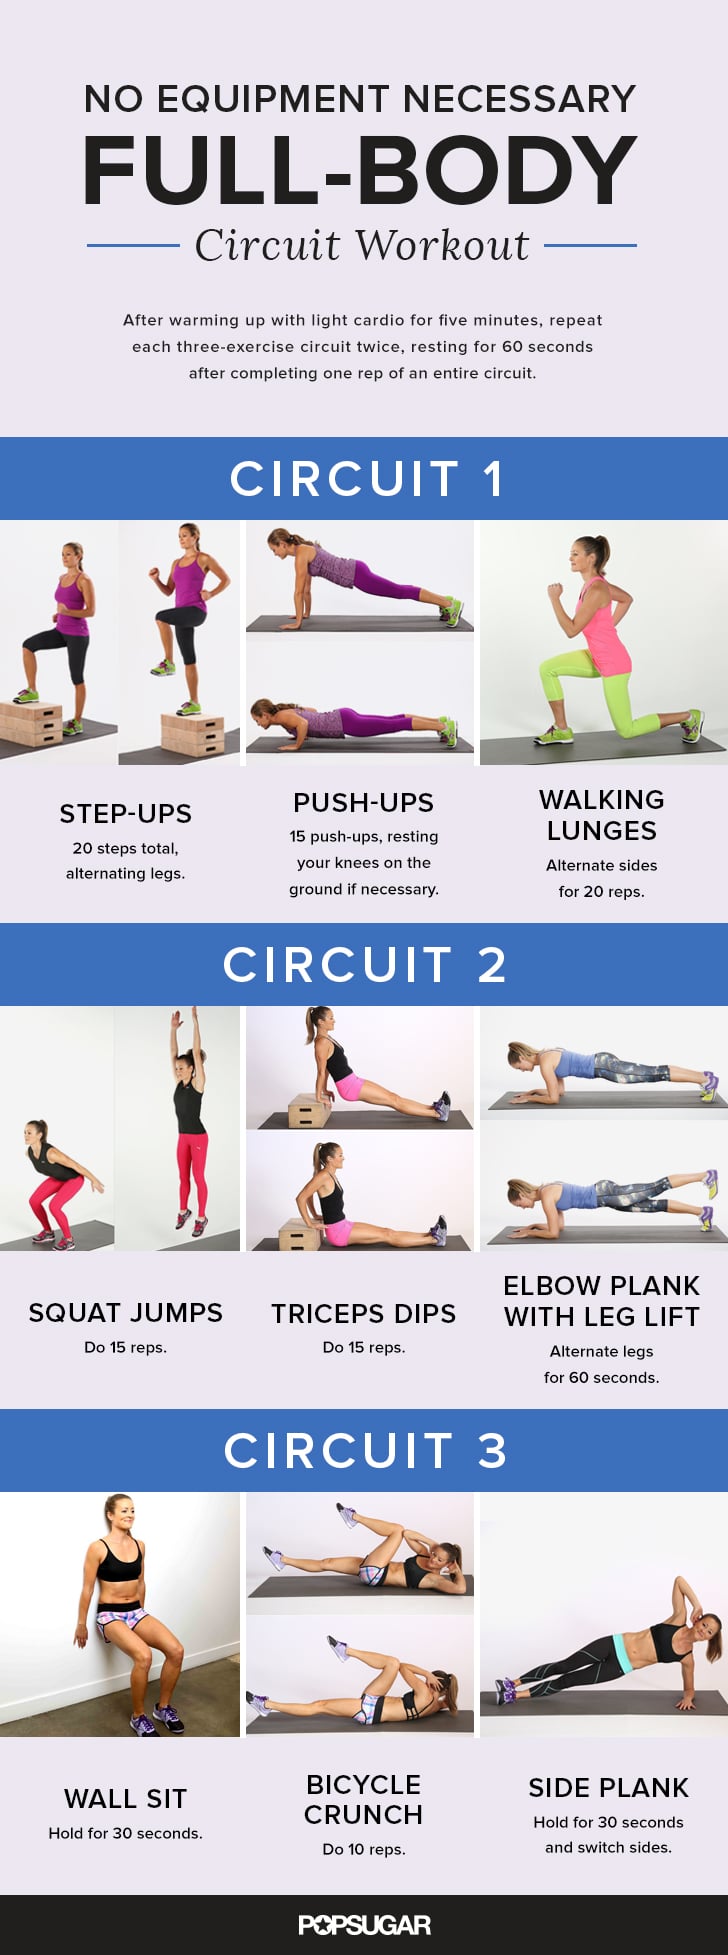 Full Body Circuit Workout to Strengthen Legs, Abs, and Arms